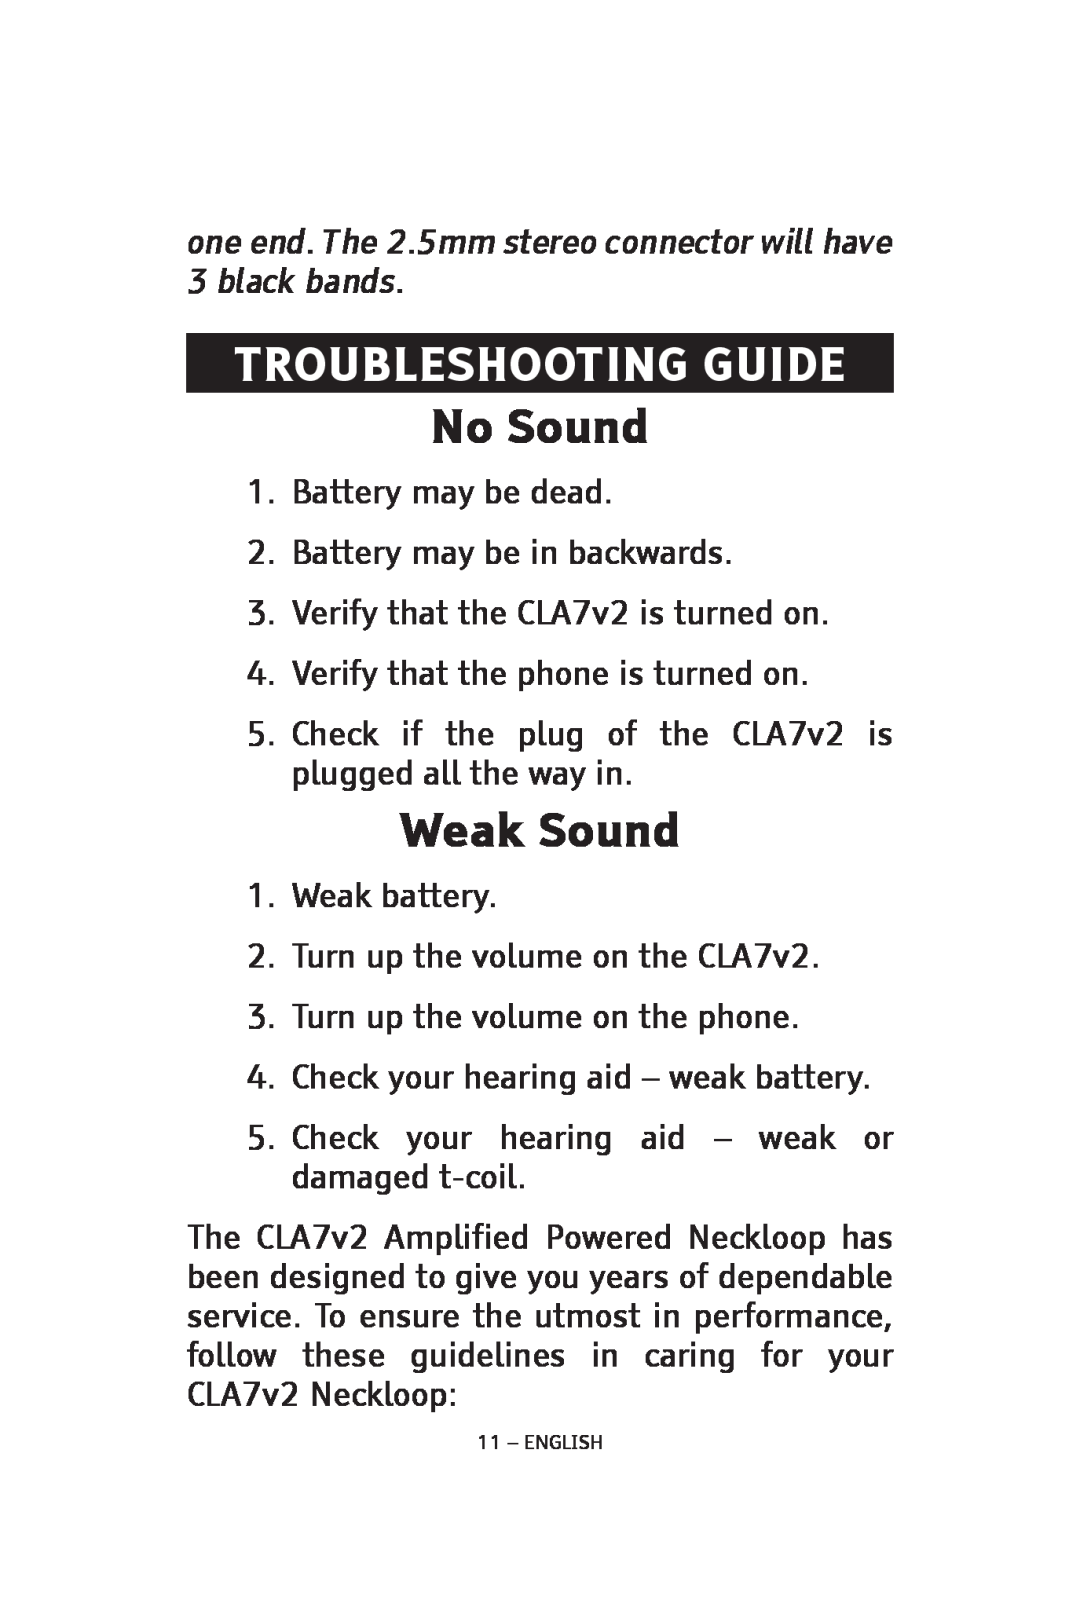 ClearSounds CLA7V2 manual Troubleshooting Guide, No Sound, Weak Sound 